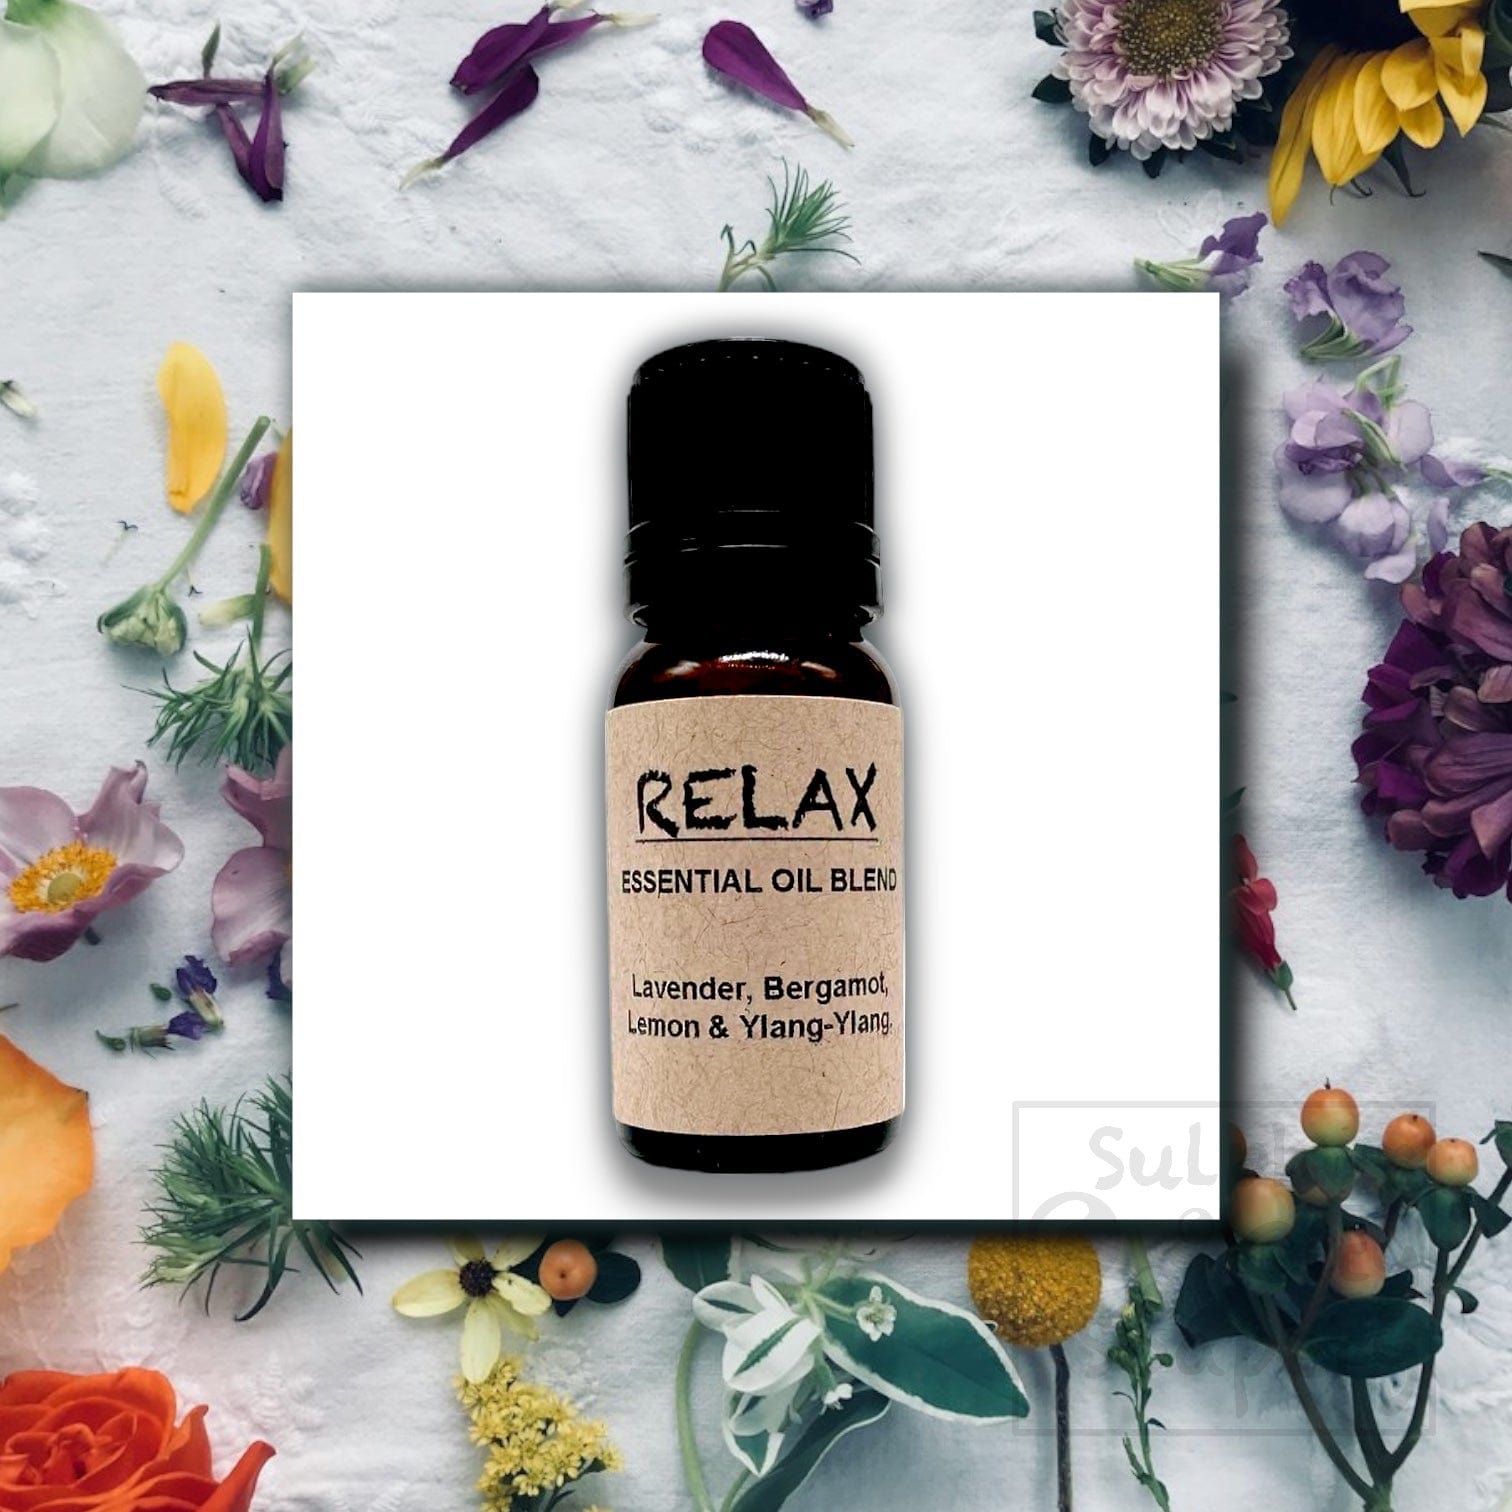 Sulphur City Soapery essential oil Relax, pure essential oil blend.